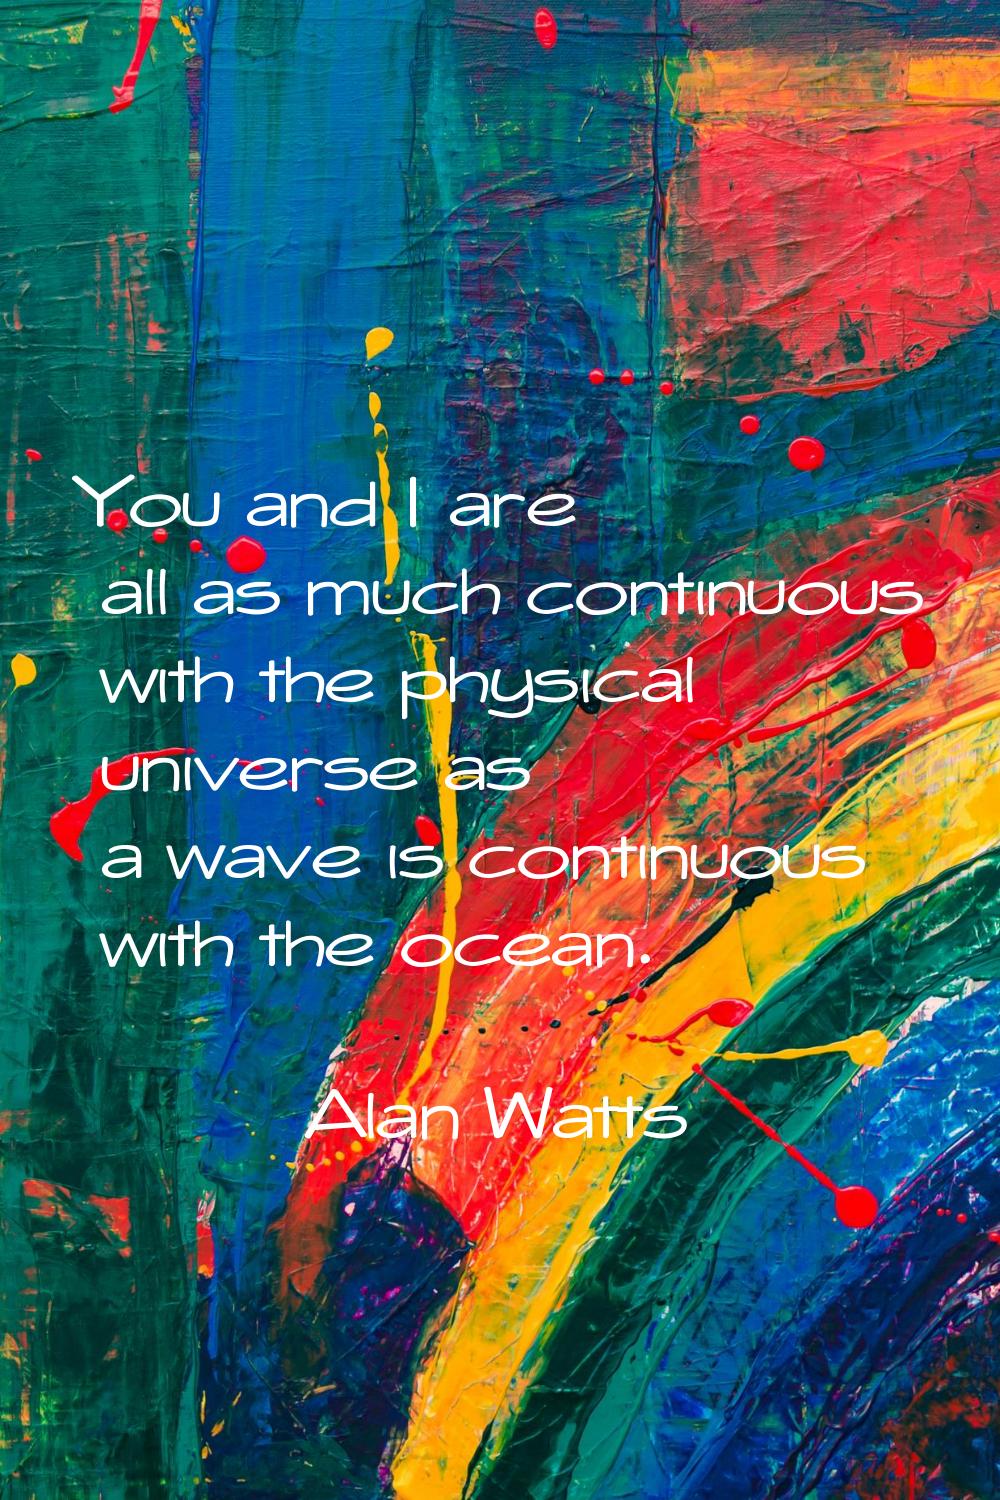 You and I are all as much continuous with the physical universe as a wave is continuous with the oc